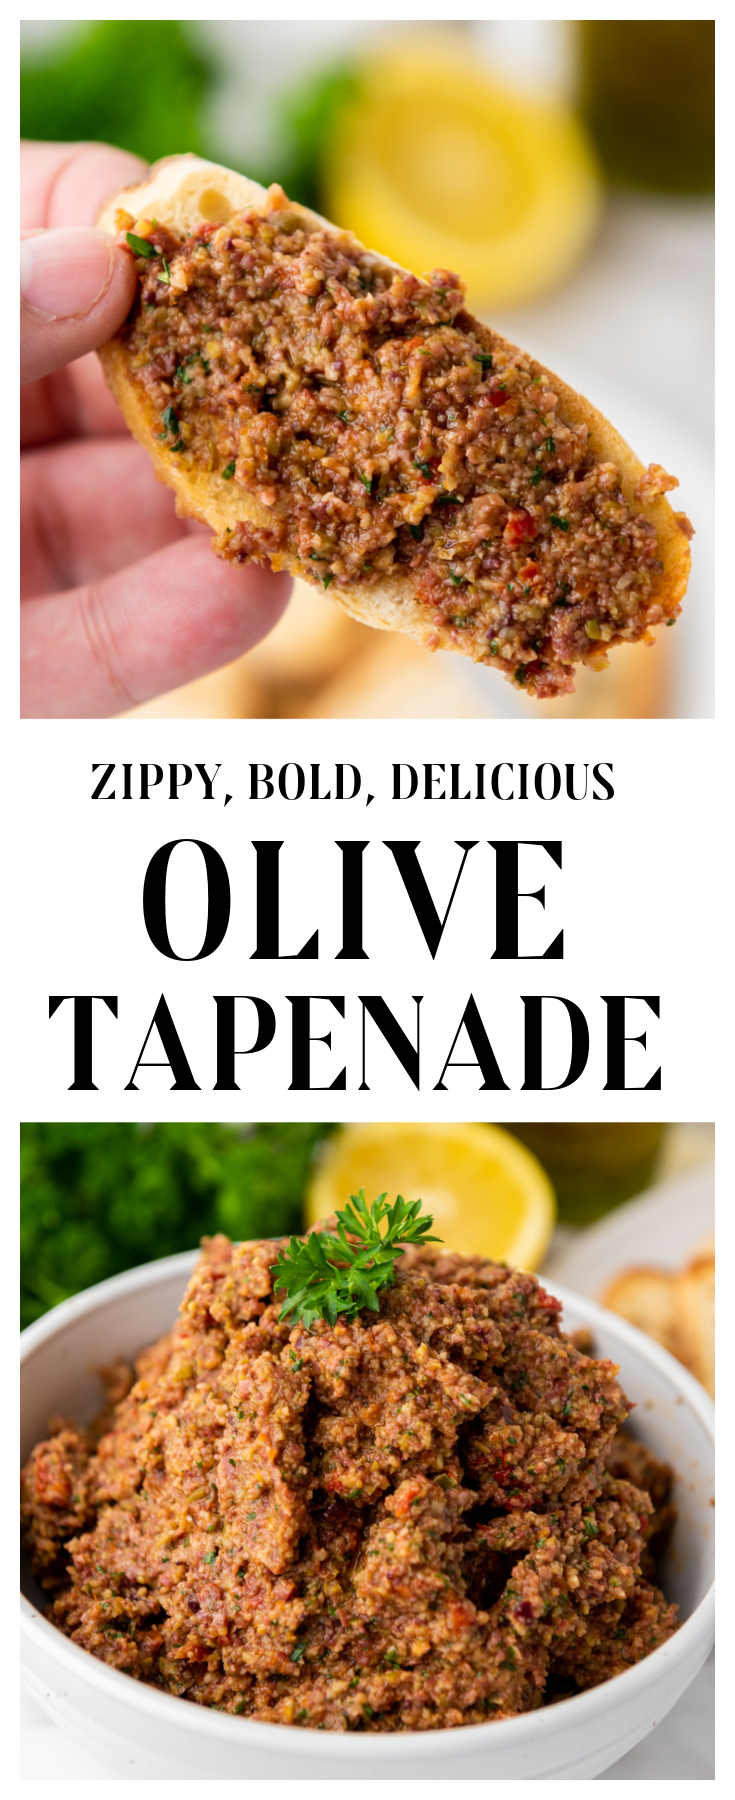 Homemade Olive Tapenade is a wonderful olive spread that is easy to make at home. Learn how to make this bold, zippy, delicious spread easily at home! #olive #tapenade #spread #condiment #appetizer